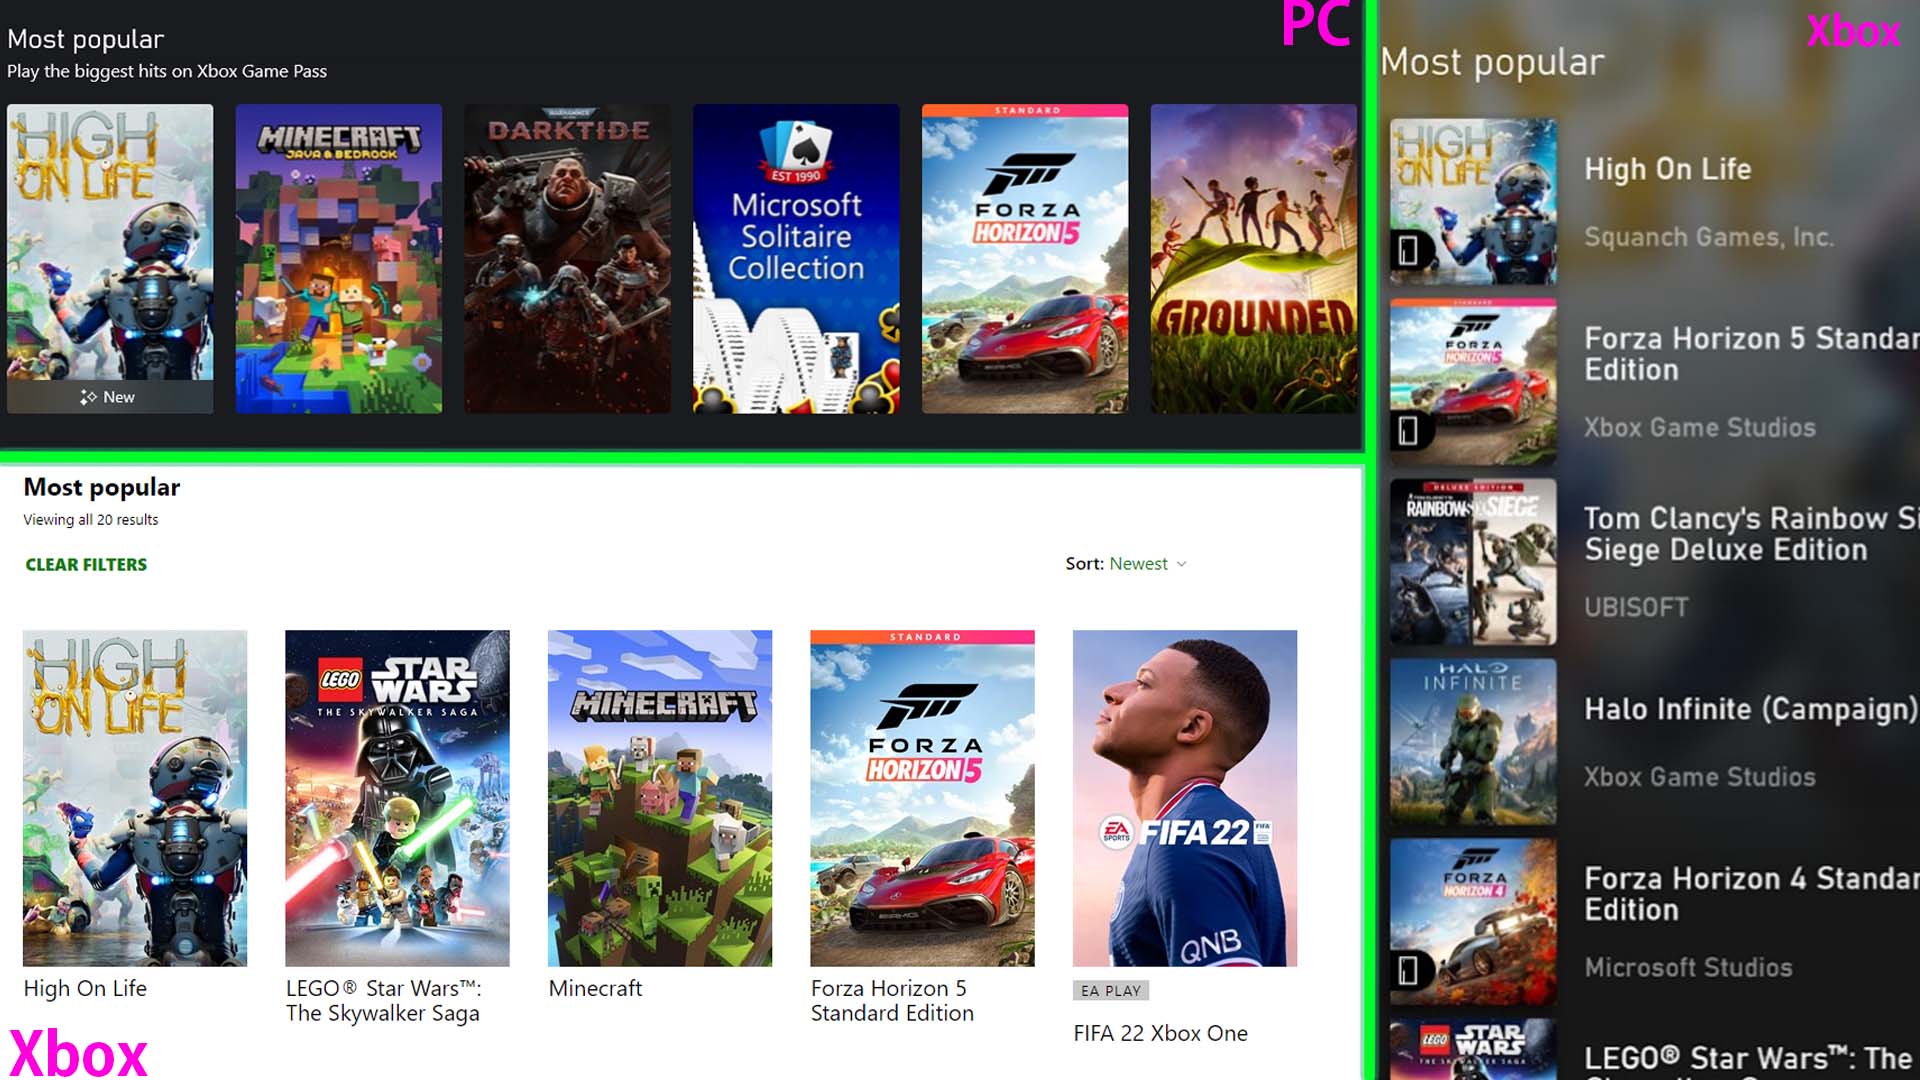 High On Life Is The 3rd Most Popular Title On Xbox And PC Game